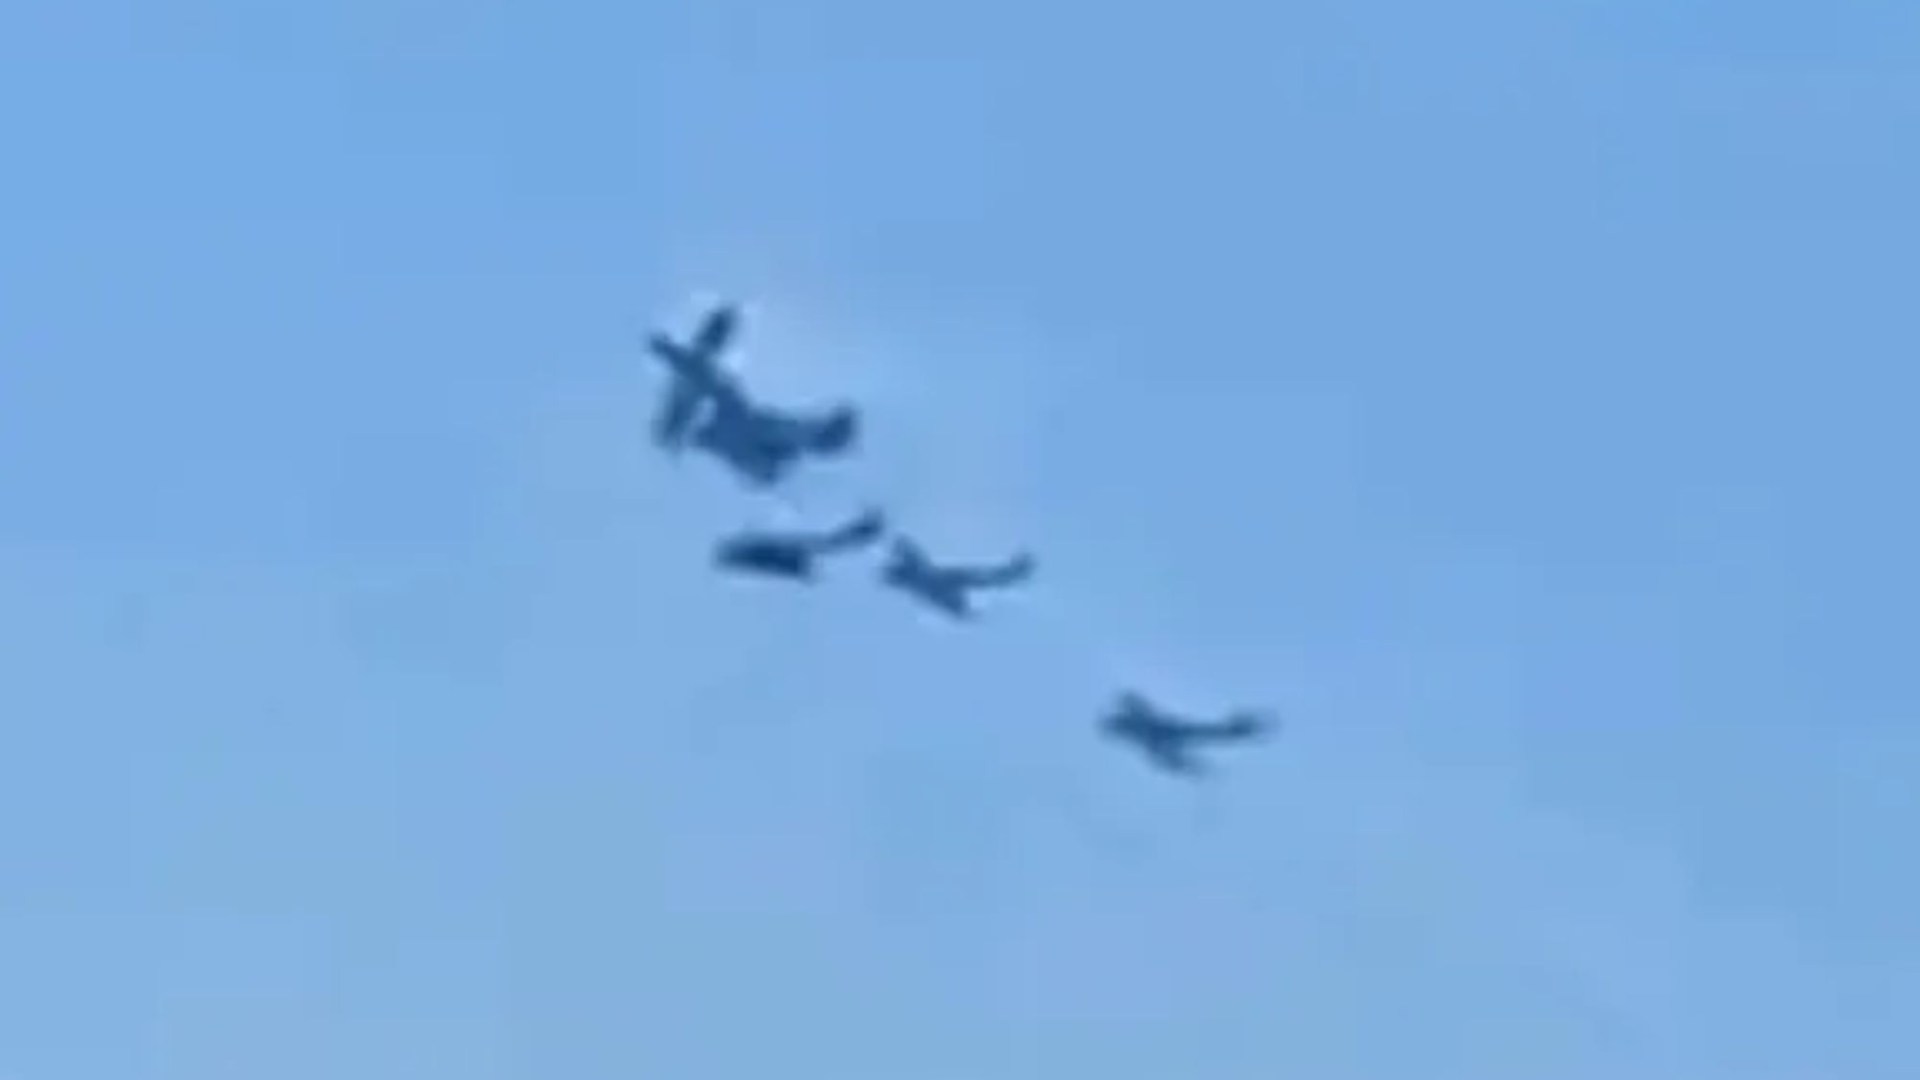 At least one killed as two stunt planes crash mid-air in front of horrified onlookers at Portugal’s Beja Air Show [Video]